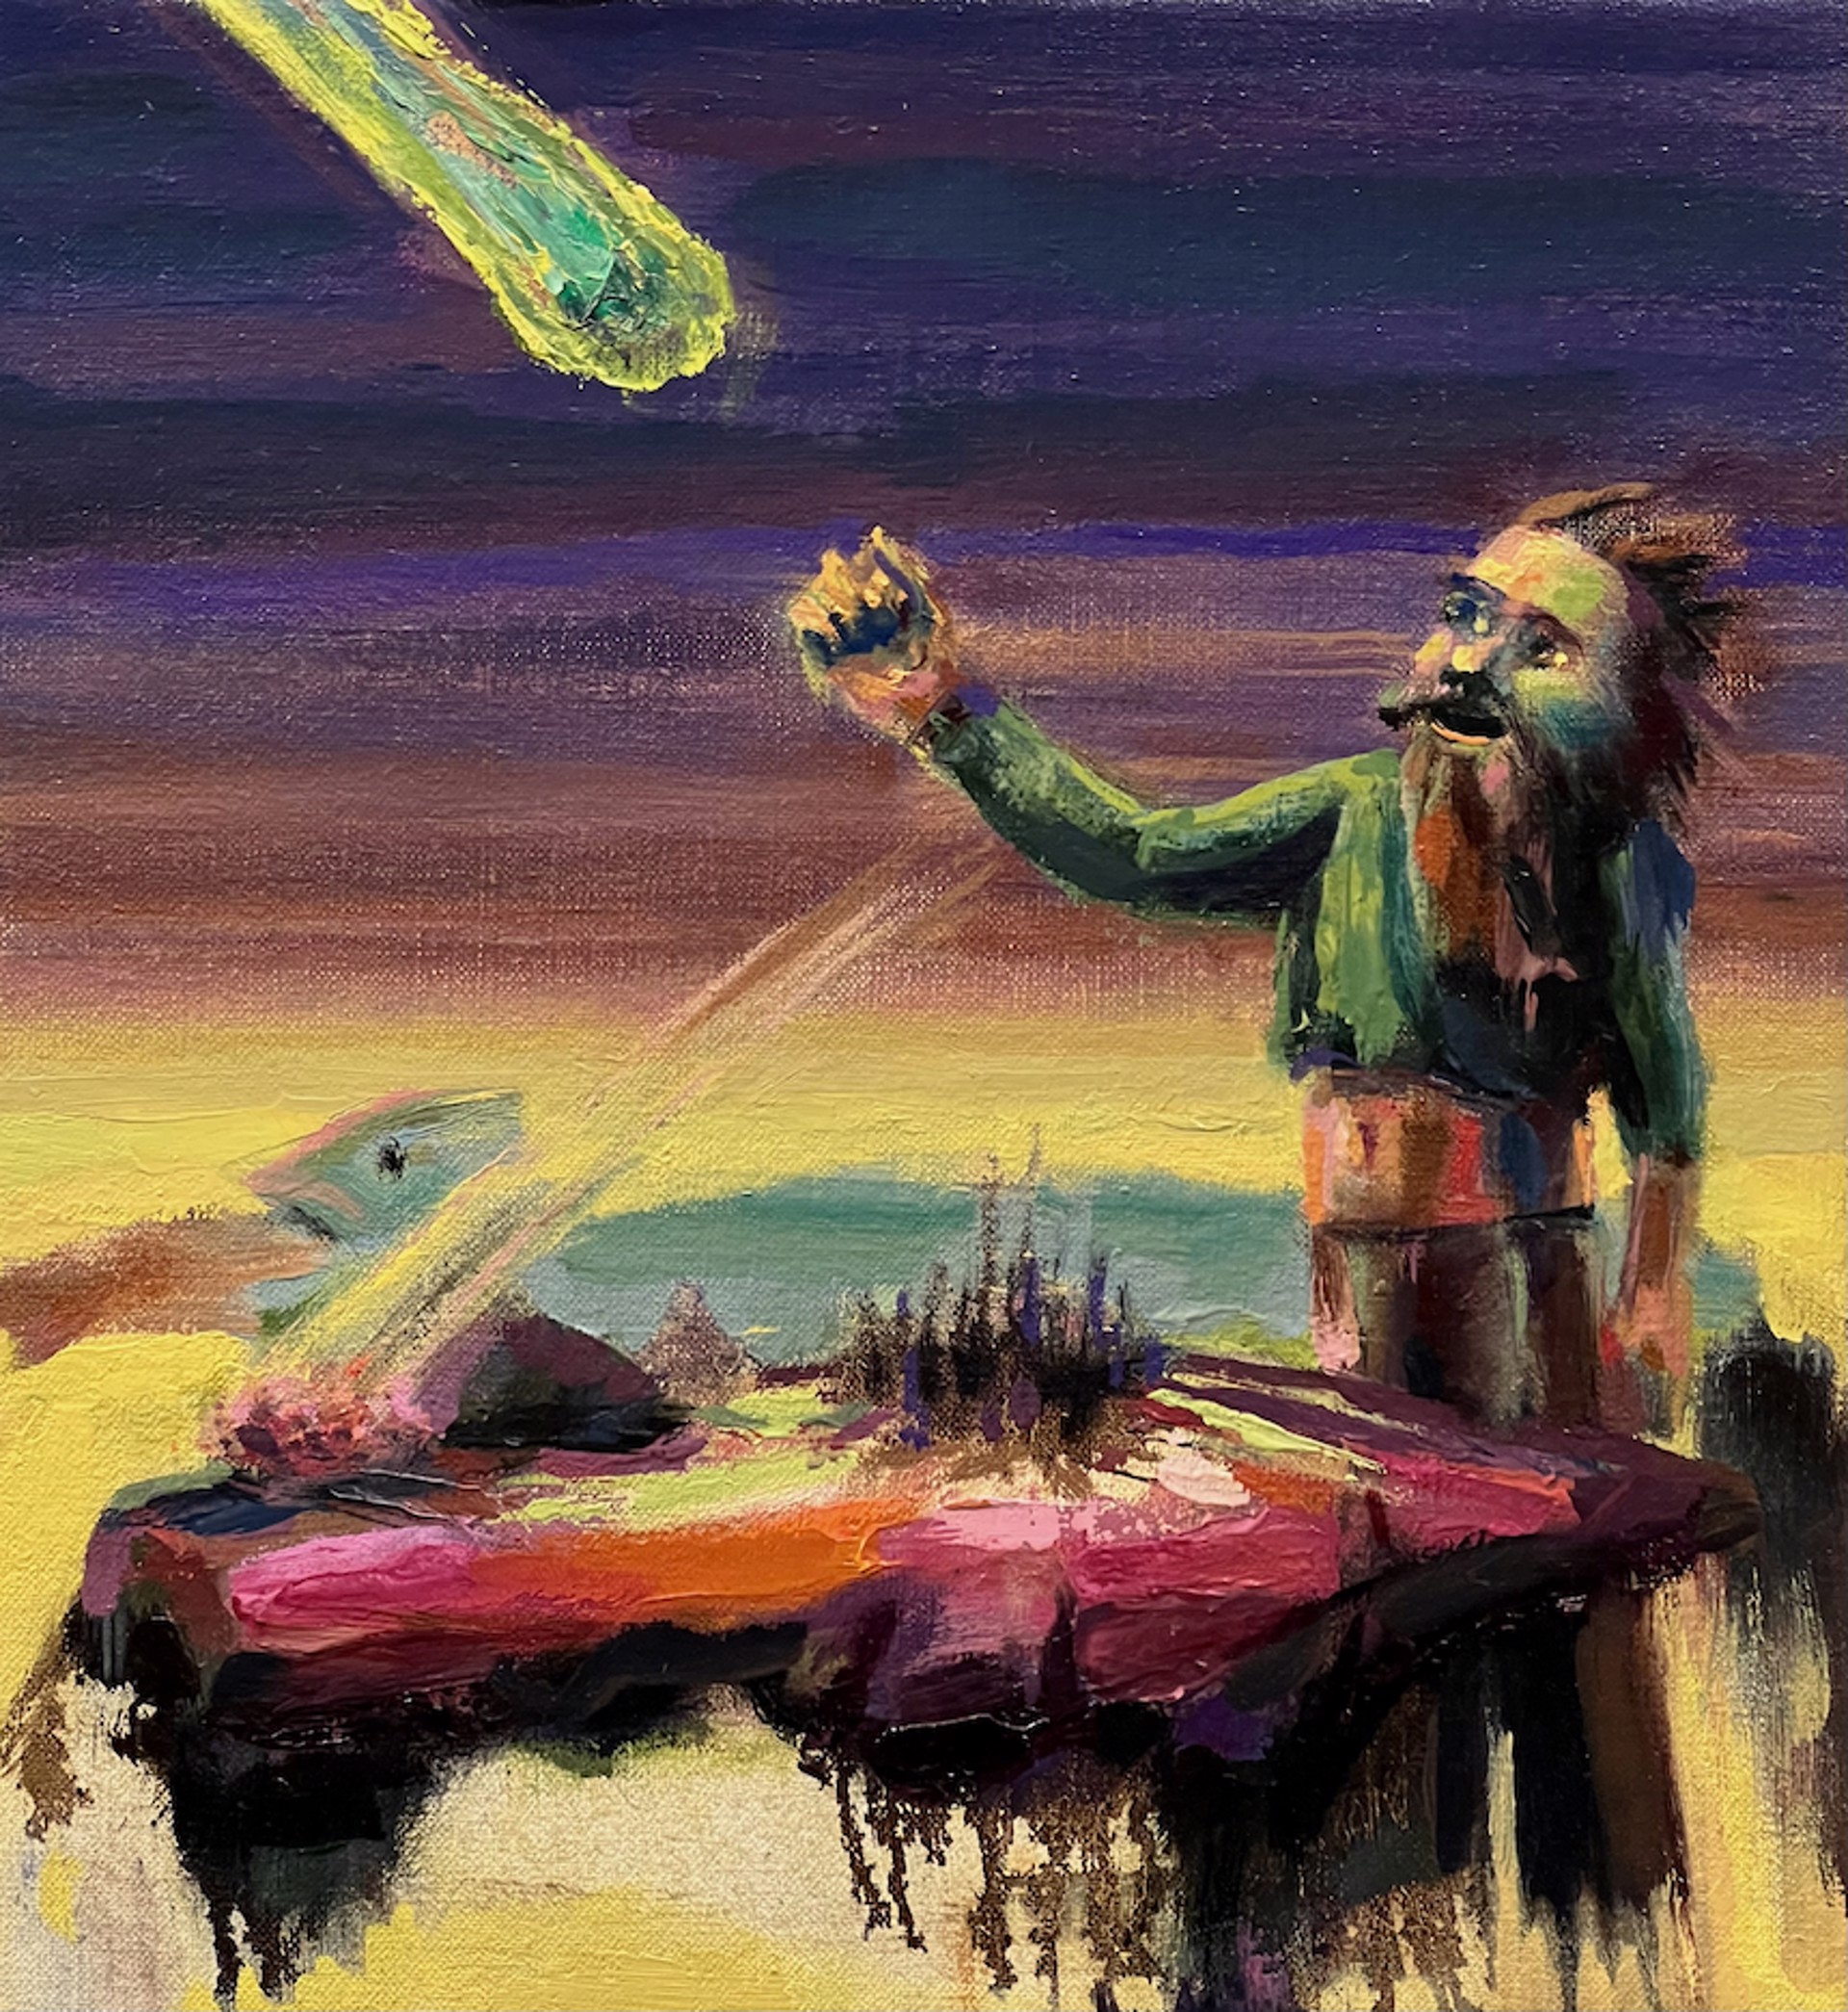 Fist Bumping A Meteor Over The Small World by Thomas Whittaker Kidd